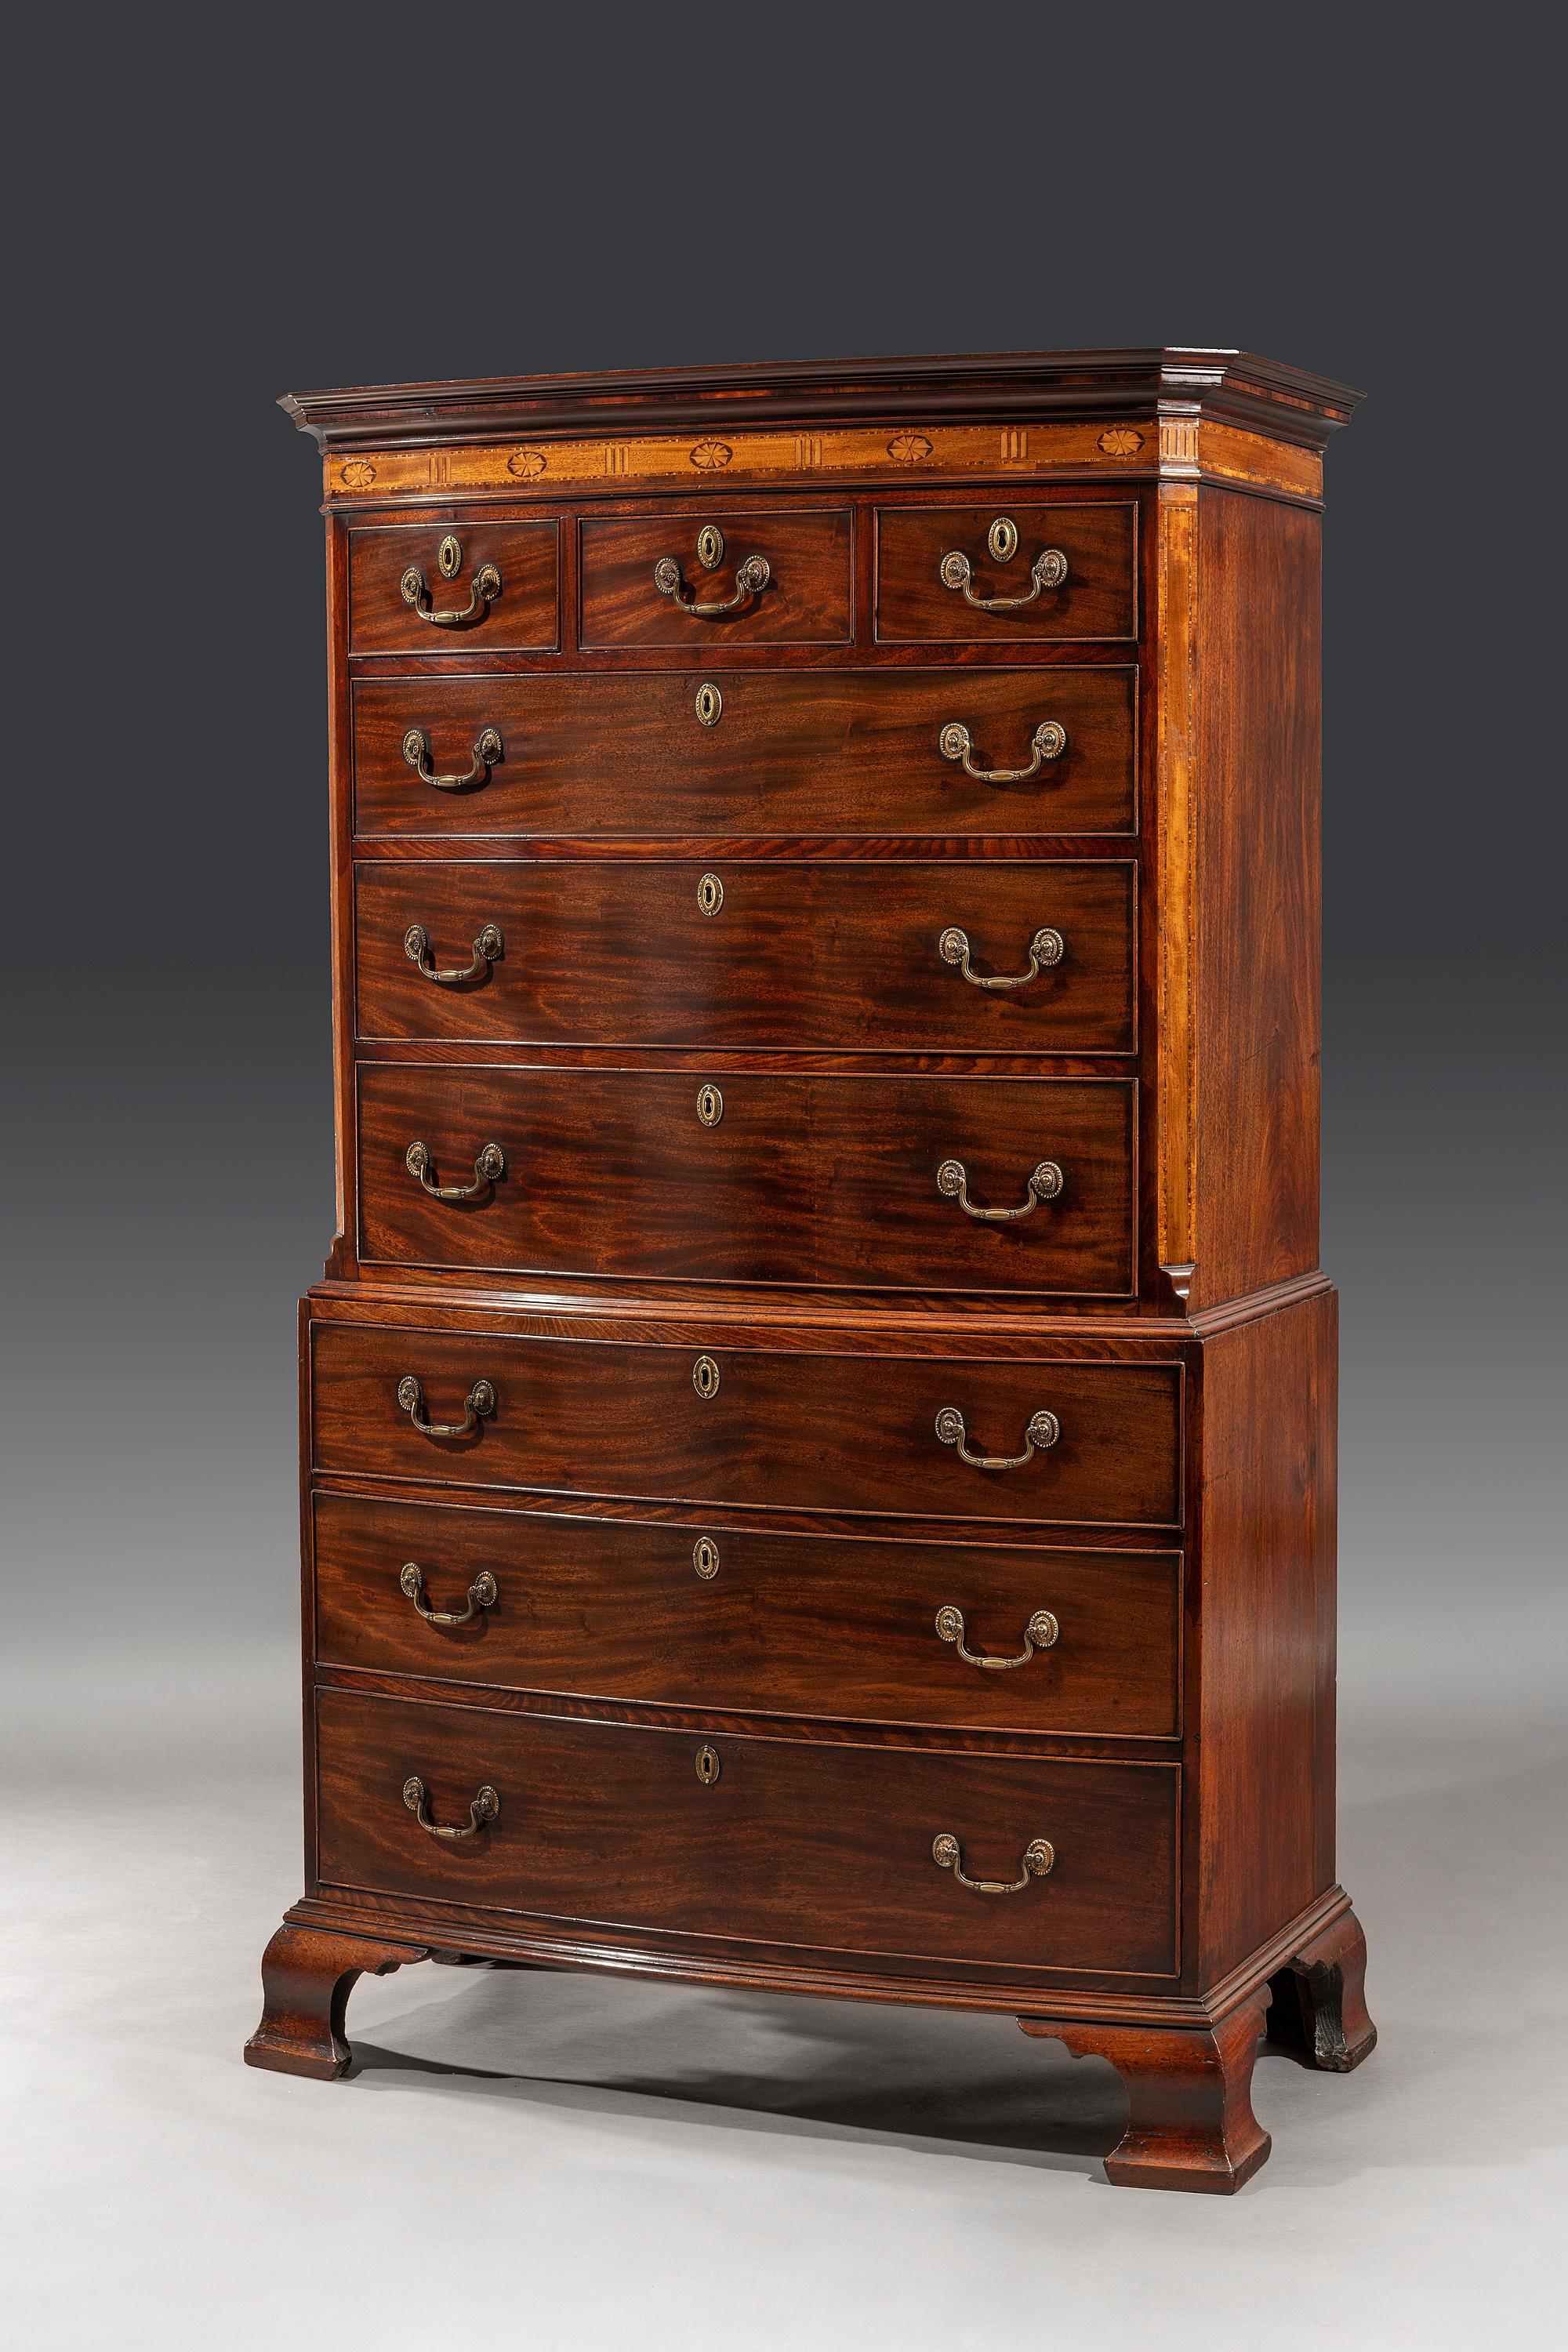 British George III Adam Period 18th Century Bow-Fronted Inlaid Chest on Chest For Sale